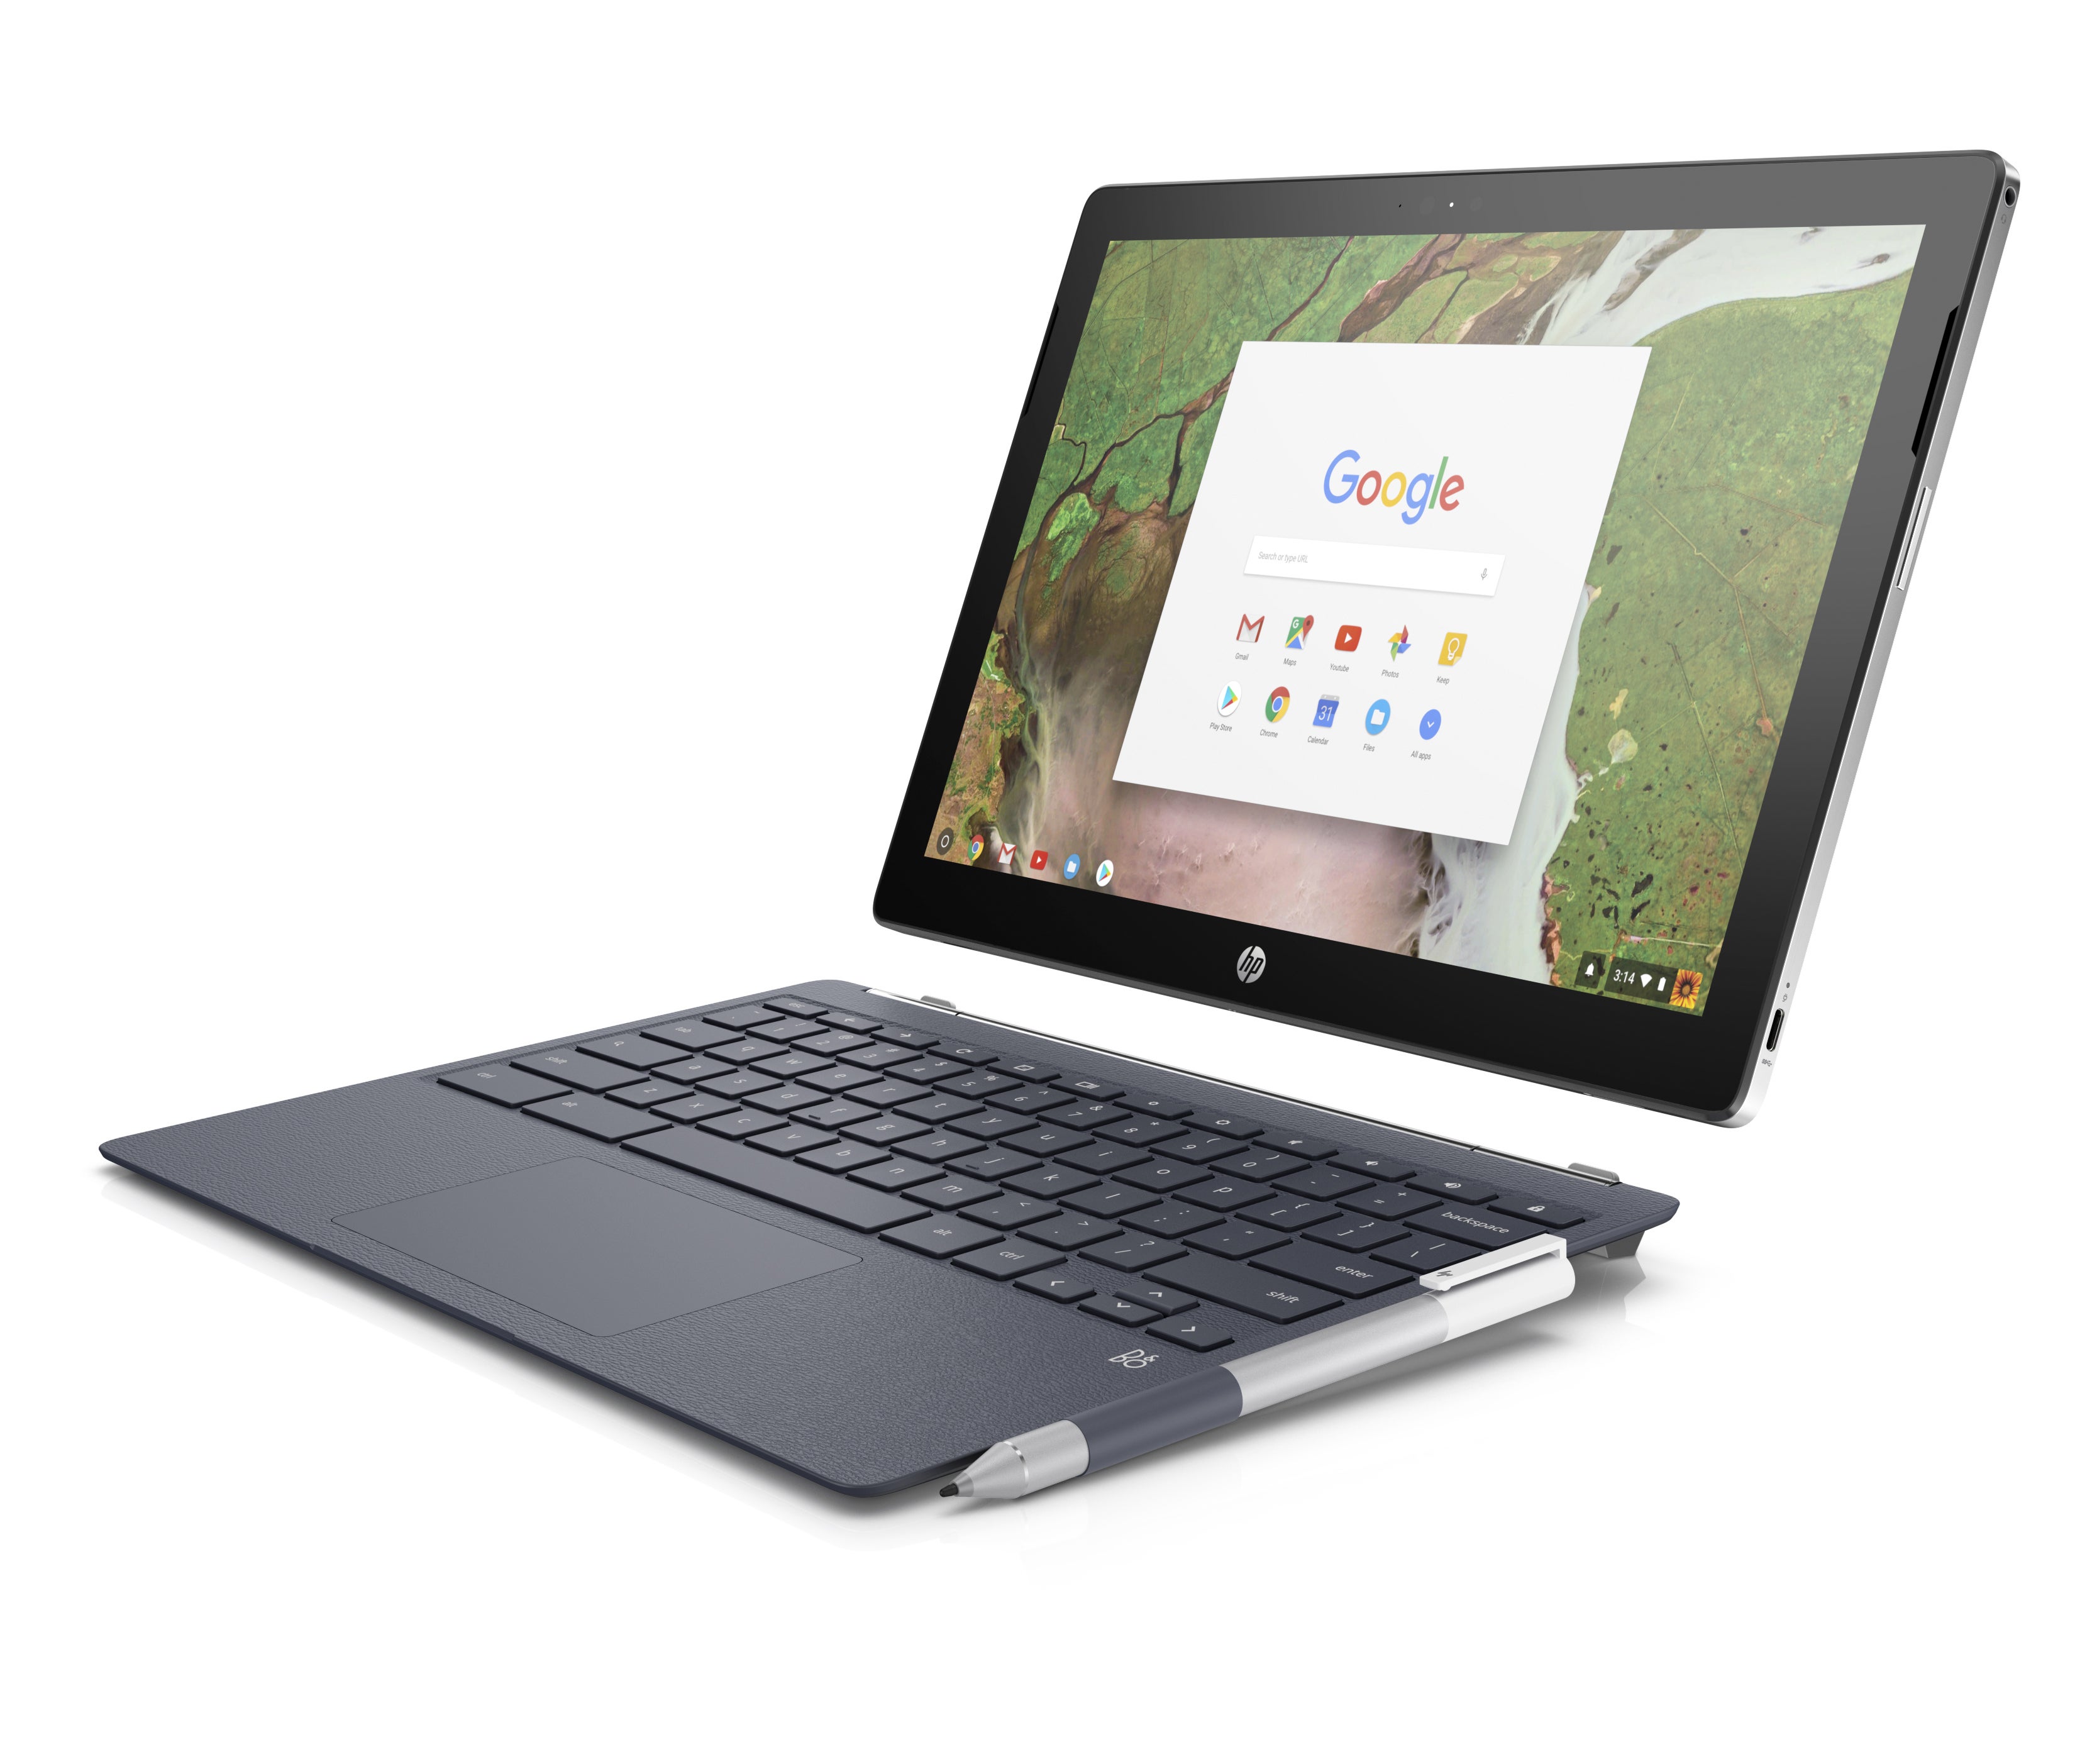 The HP Chromebook x2 is a 599 premium tablet aimed at the iPad Pro